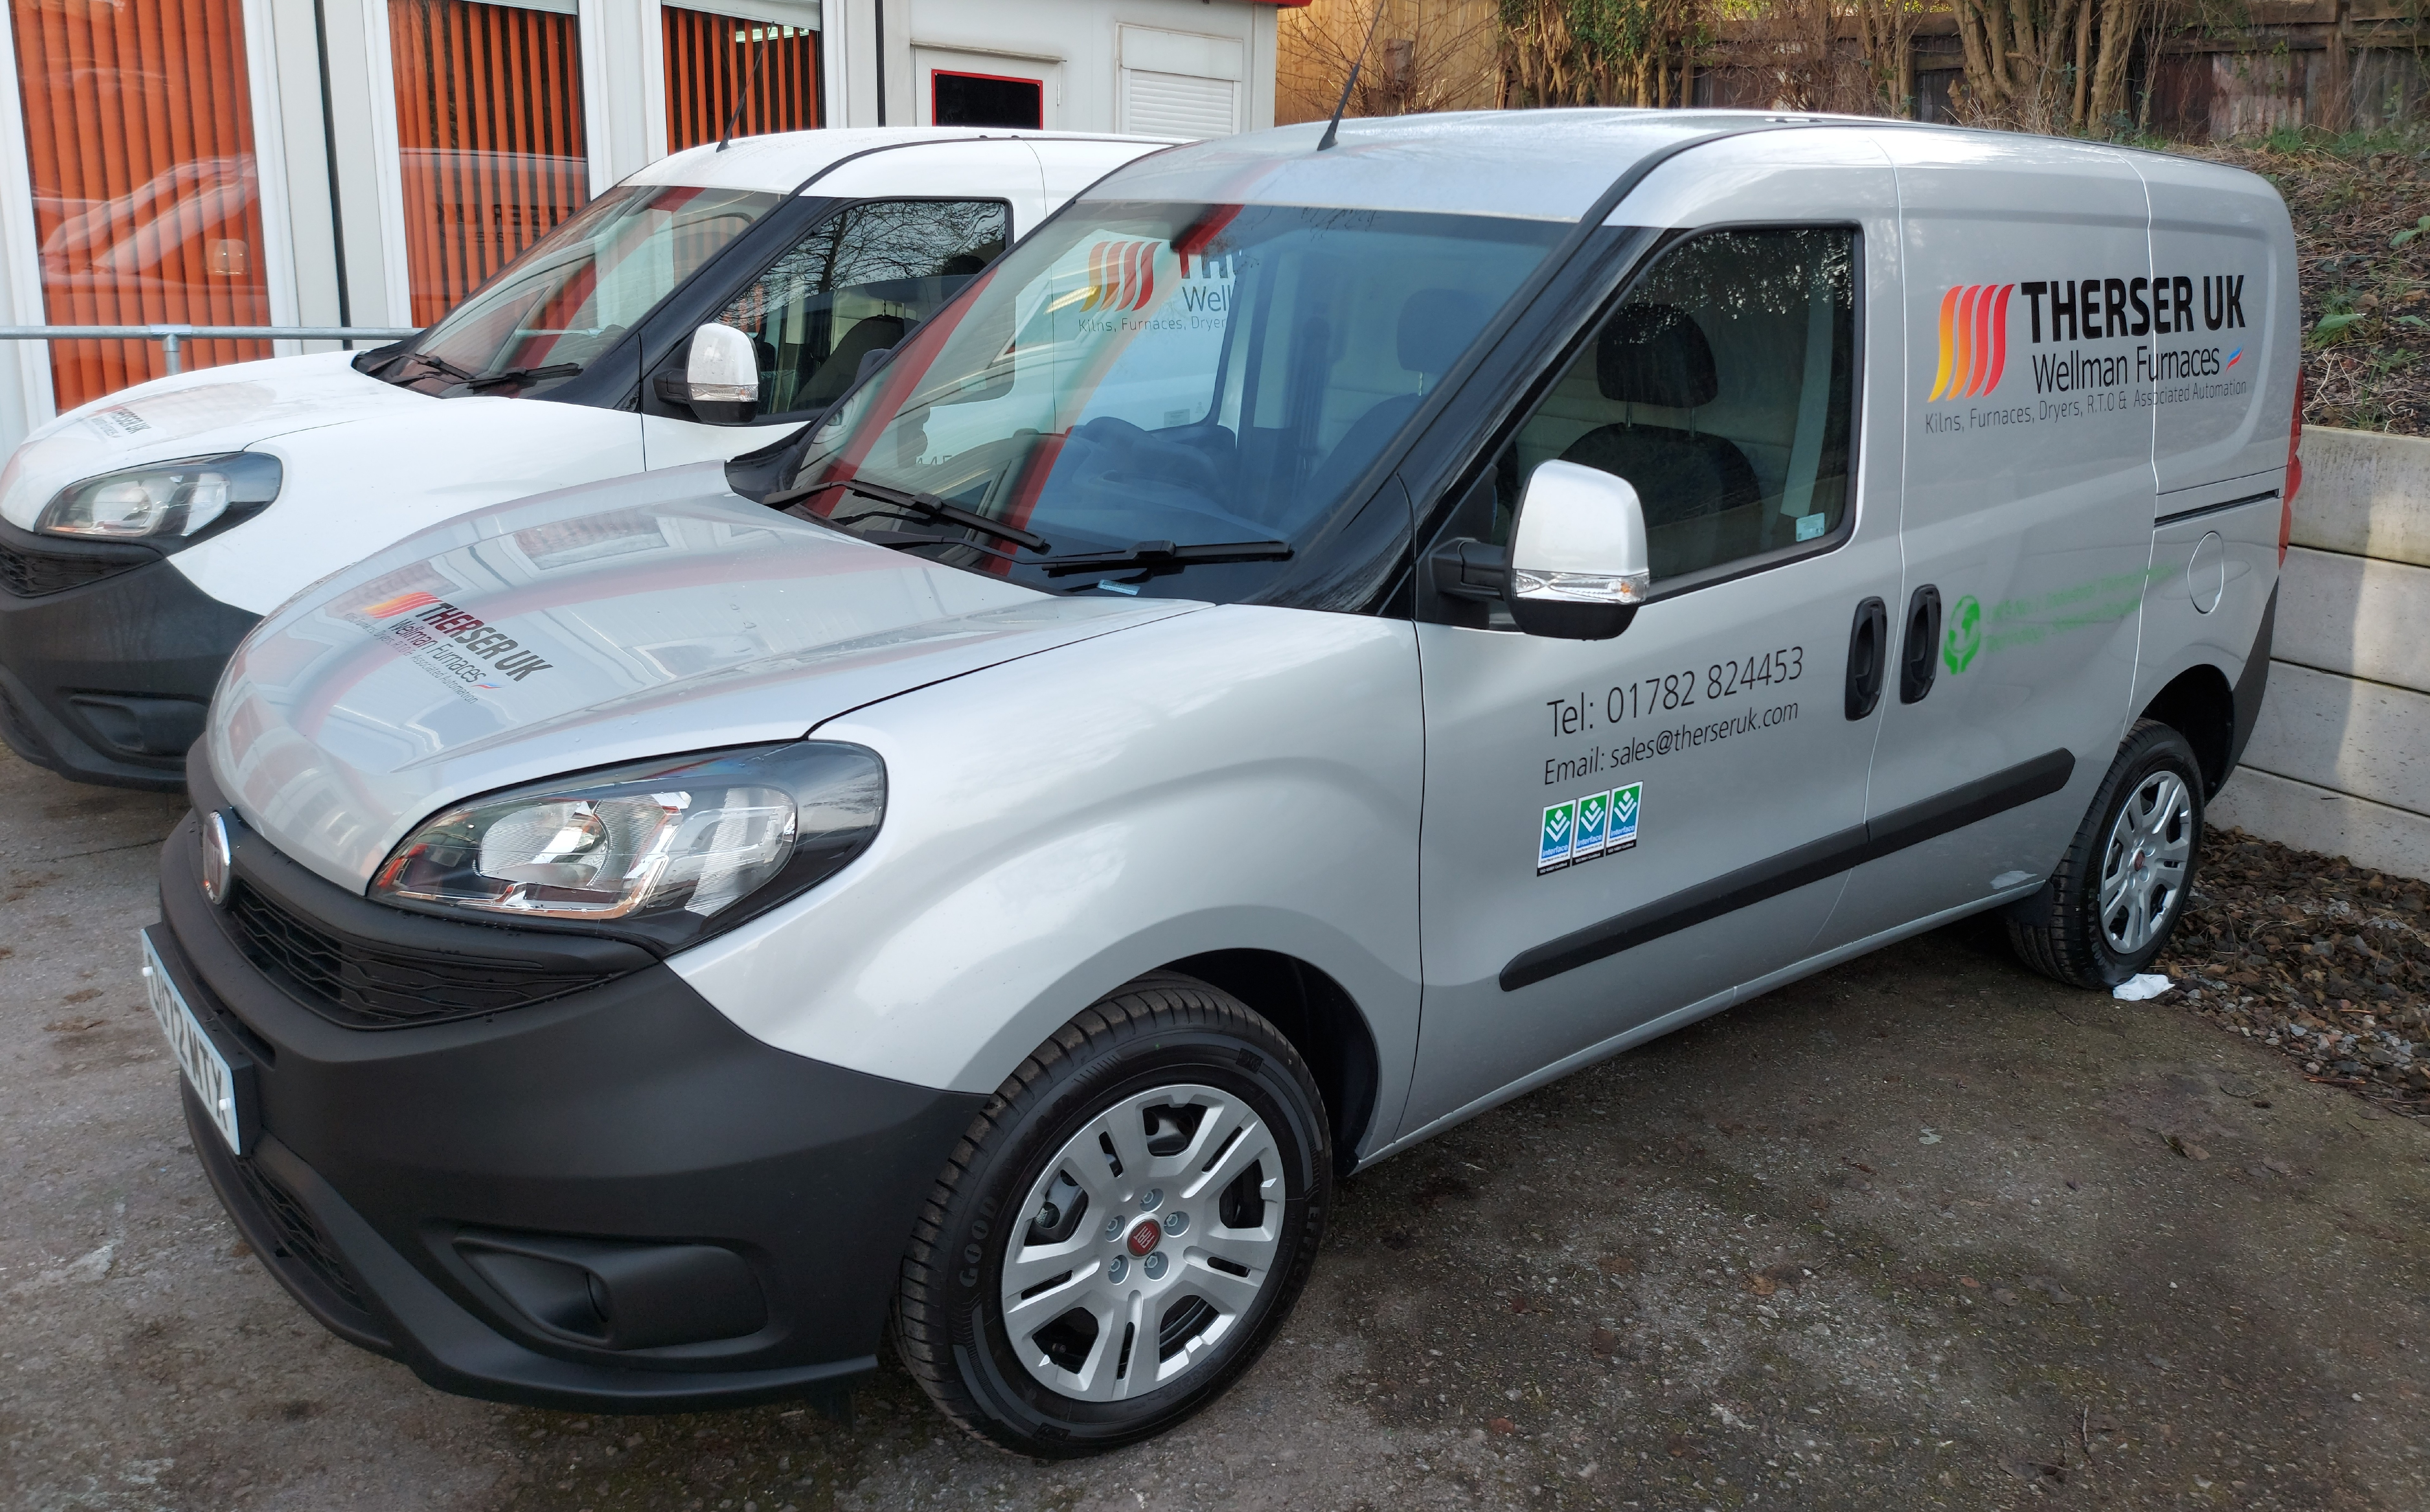 Therser UK's Rapid Expansion,  Means More Vans!